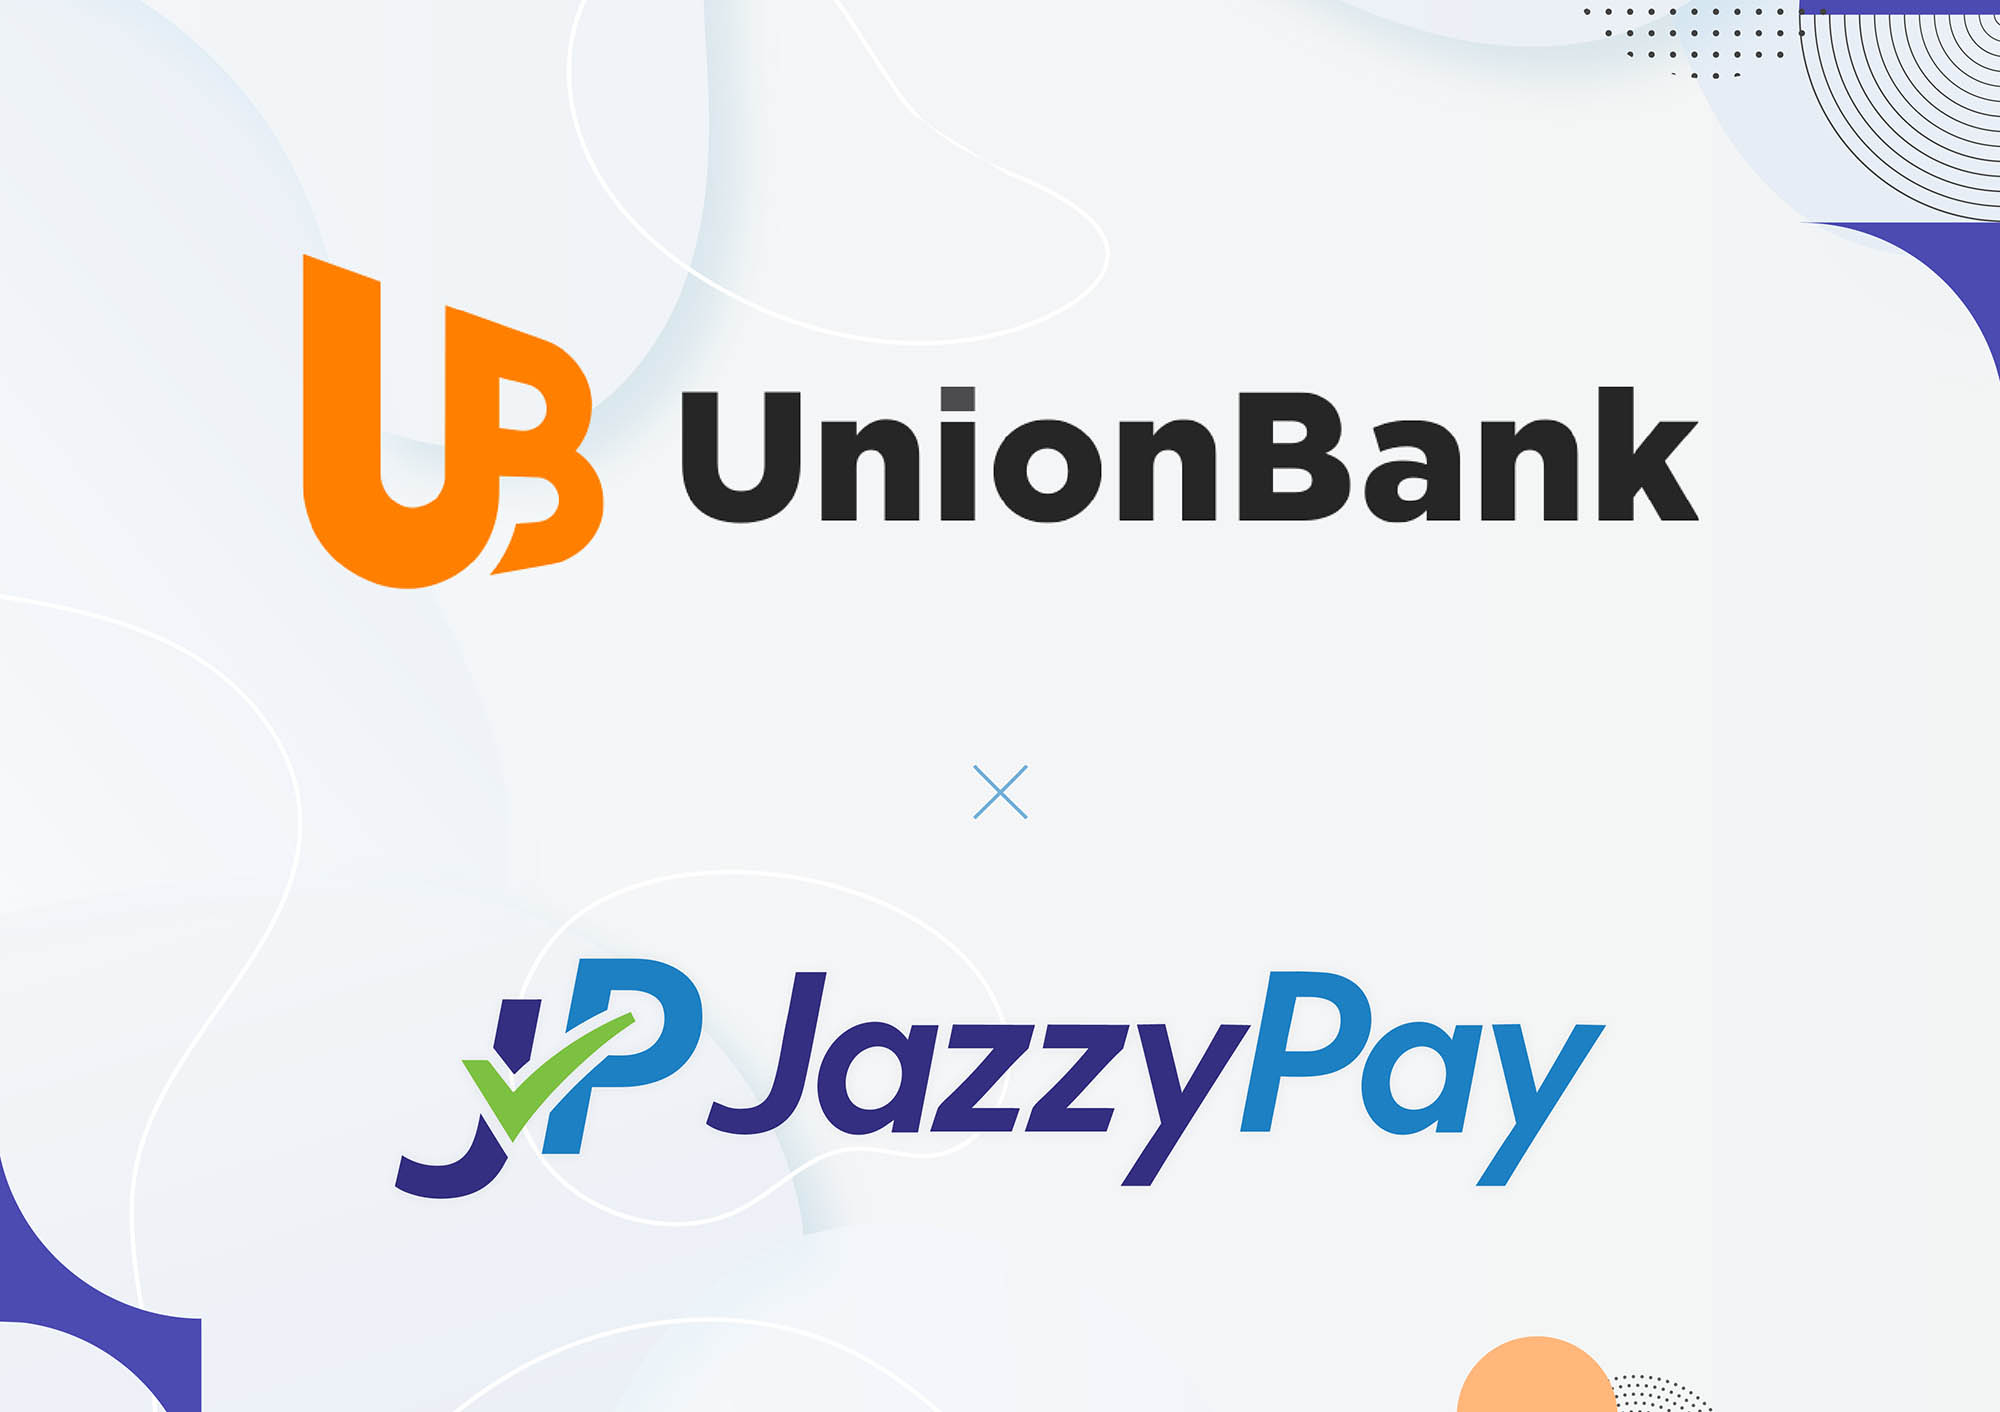 JazzyPay, UnionBank team up to provide cashless payment solutions for SMEs and local businesses